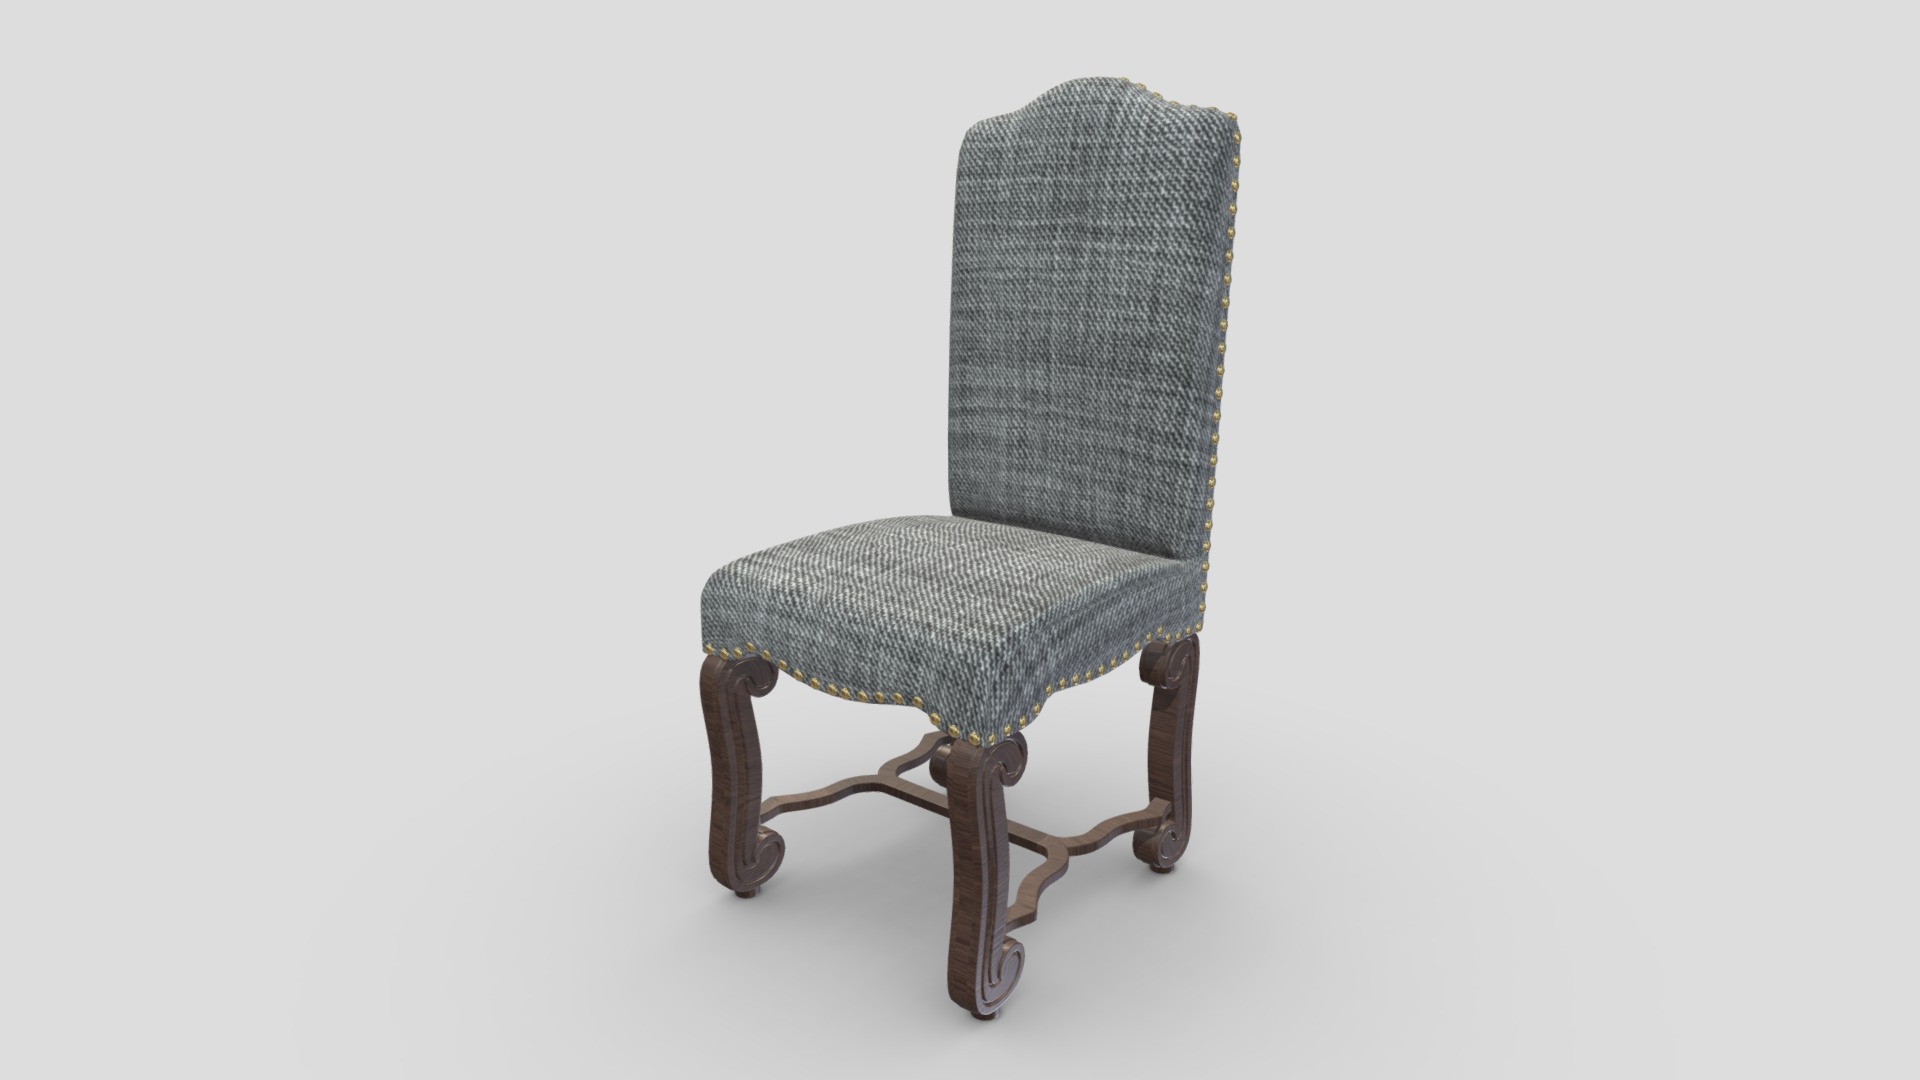 3D model Antique Chair 34 - This is a 3D model of the Antique Chair 34. The 3D model is about a chair with a cushion.